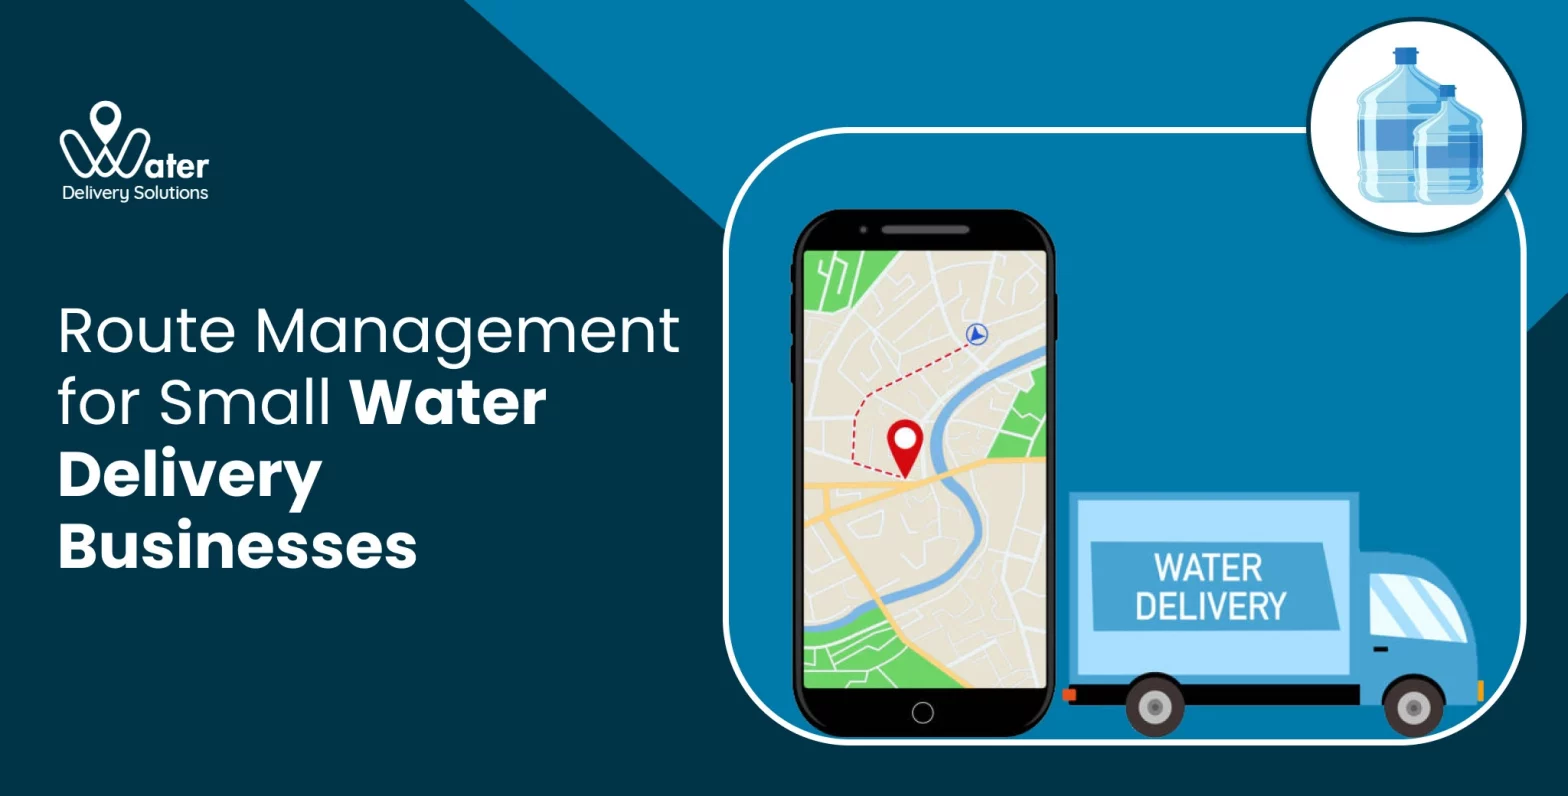 ravi garg, wds, route management, small water delivery businesses